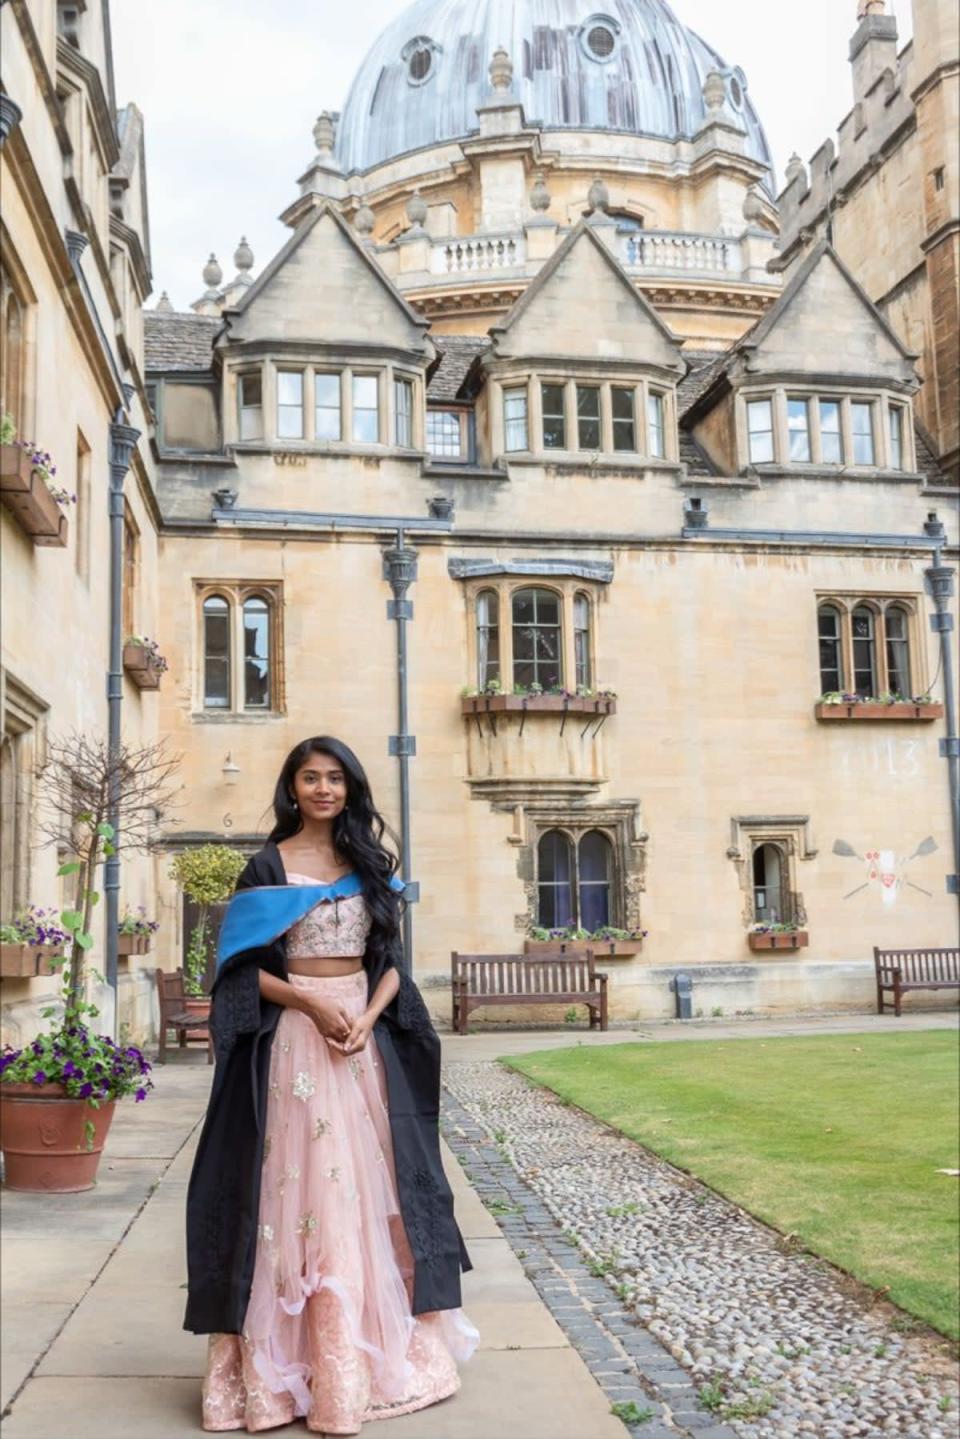 Oxford graduate said she is overwhelmed by the support she has received following the post (Supplied by Juhi Kore)